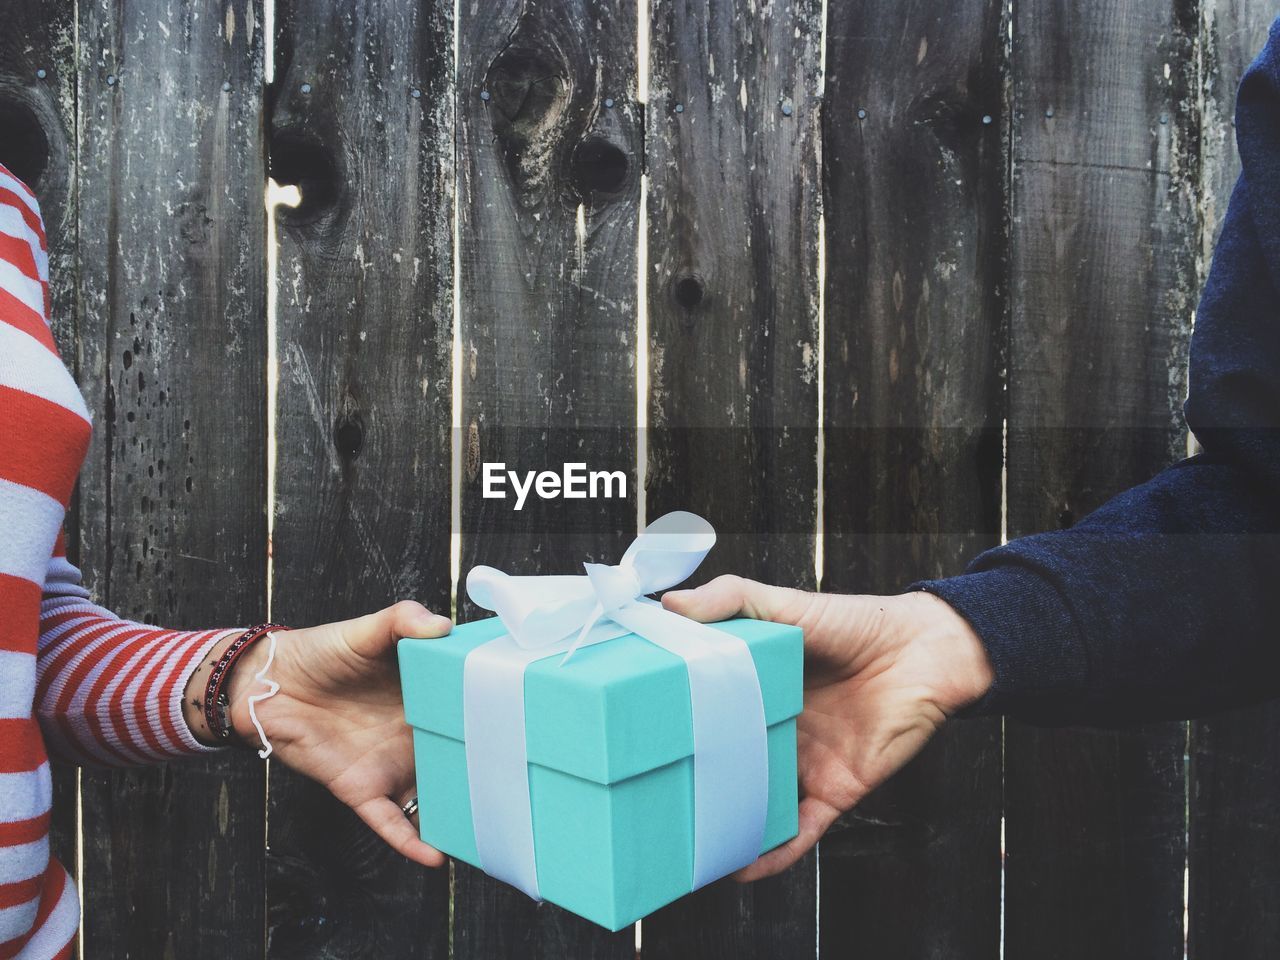 Cropped image of hands holding gift box against wooden fence